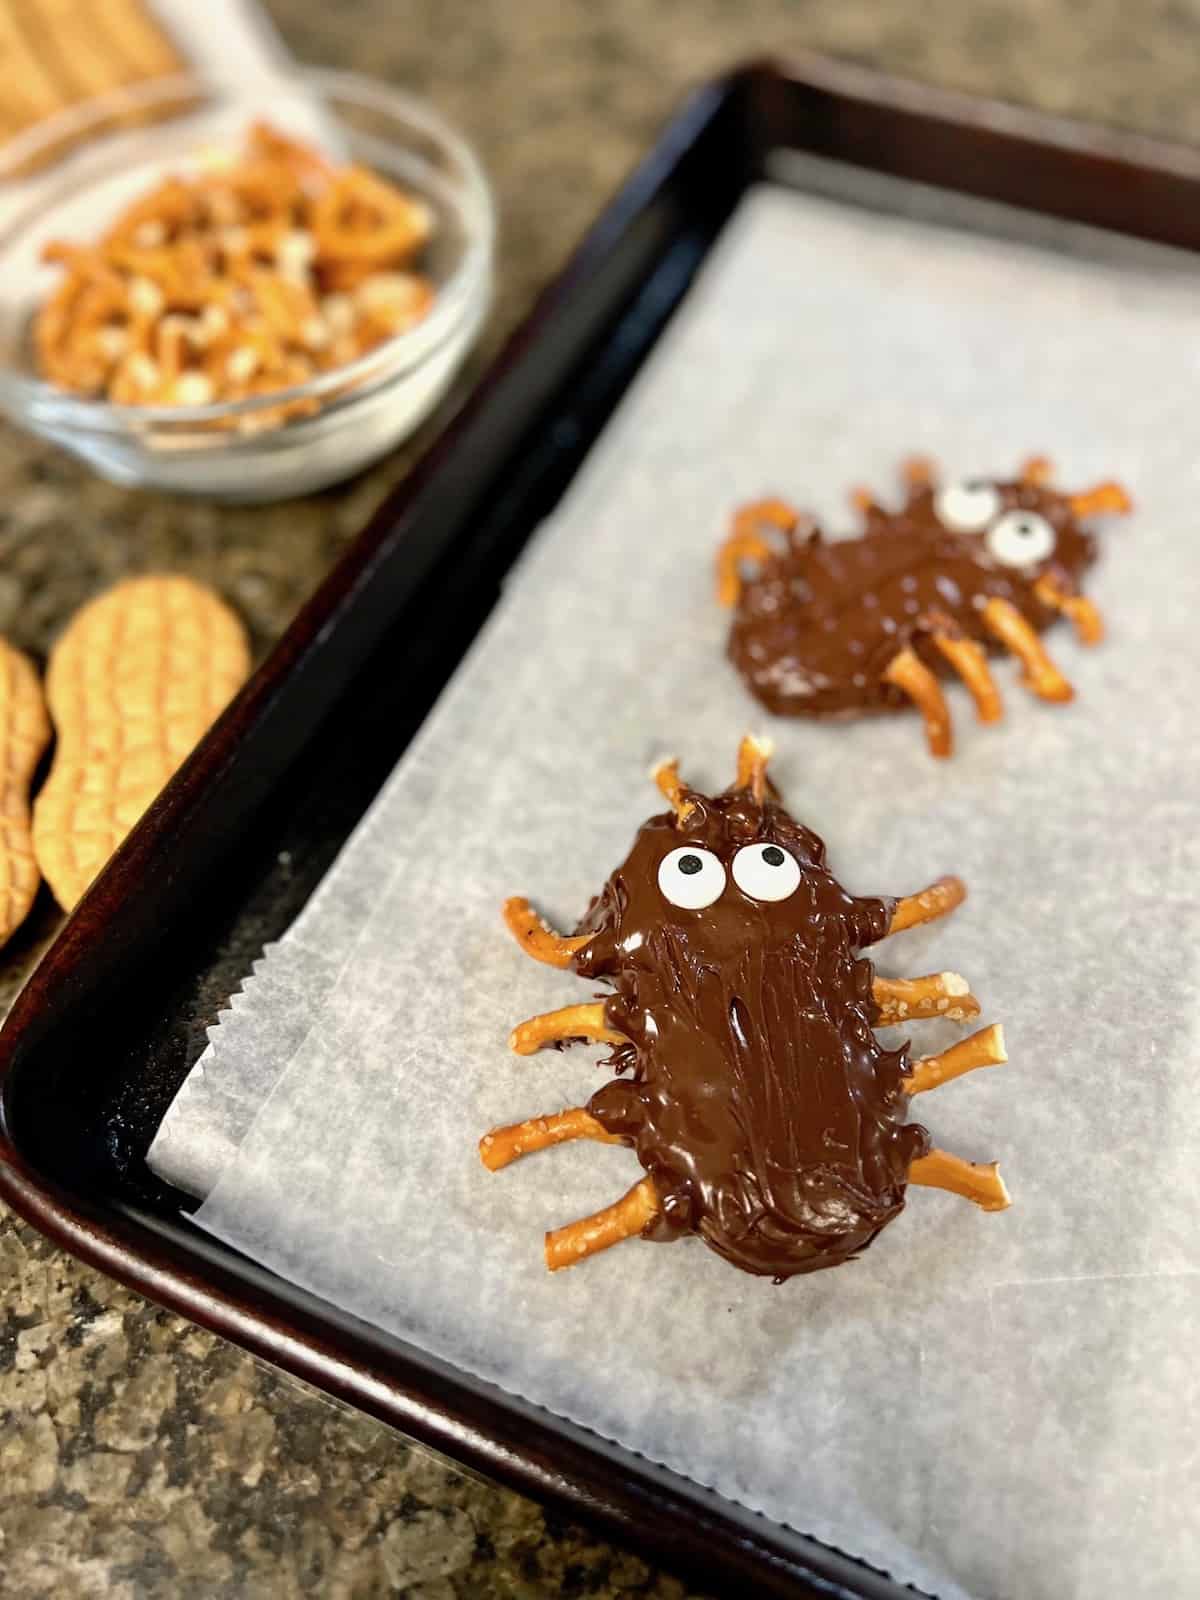 Two chocolate dipped cookies decroate to look like spiders sitting on parchment.